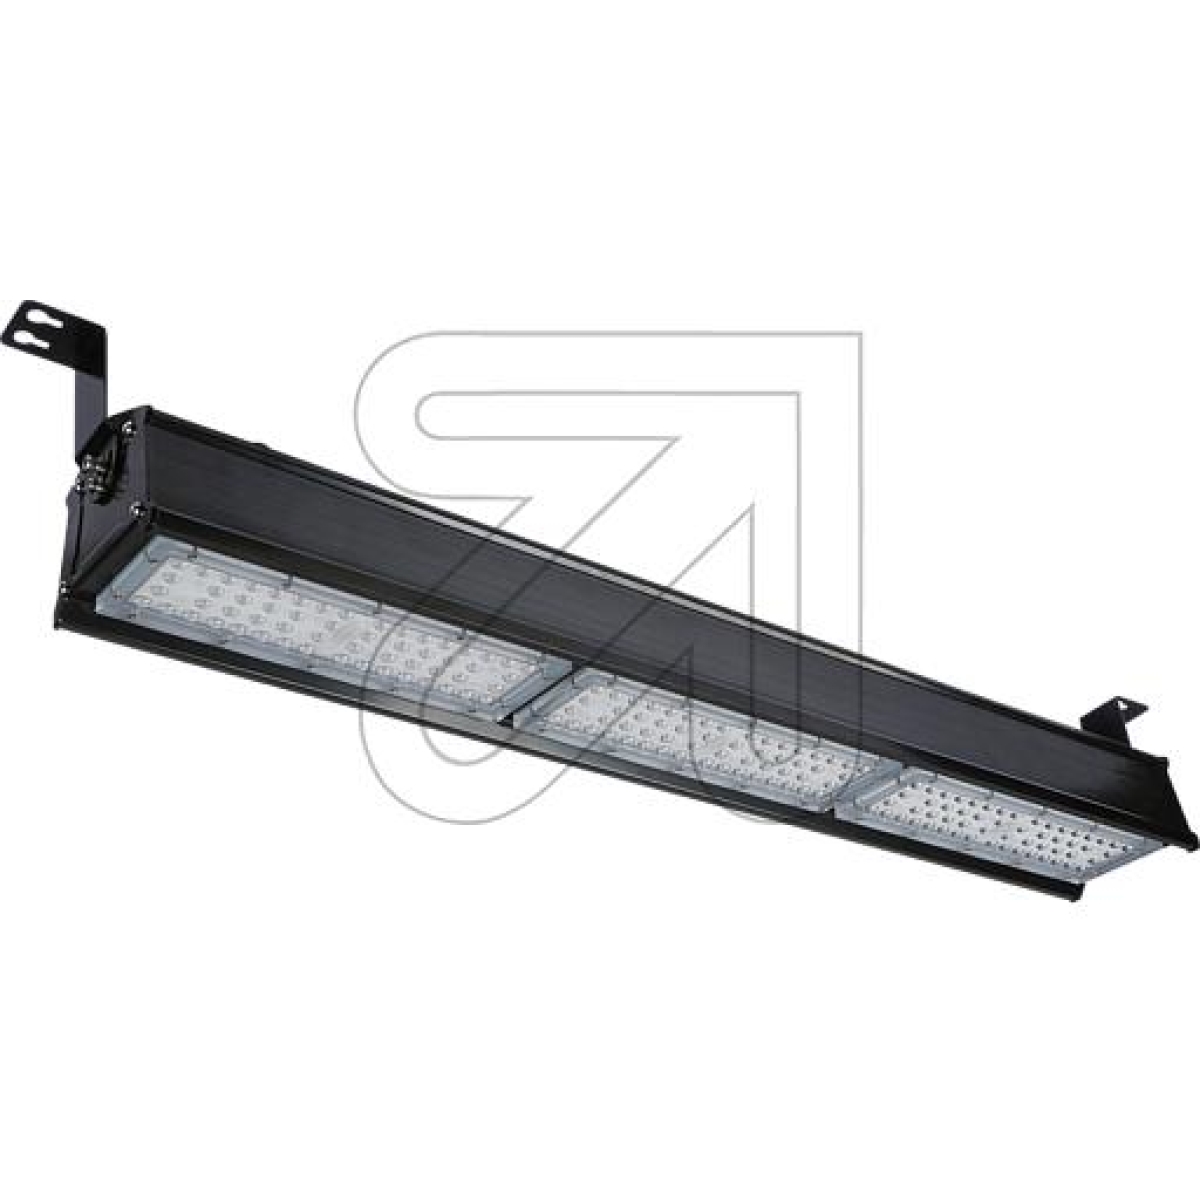 EGBLED floodlight/hall washer PRObay-linear IP65 150W 21750lm 5000K L830 B120 H100mm 2400433EGBArticle-No: 683710